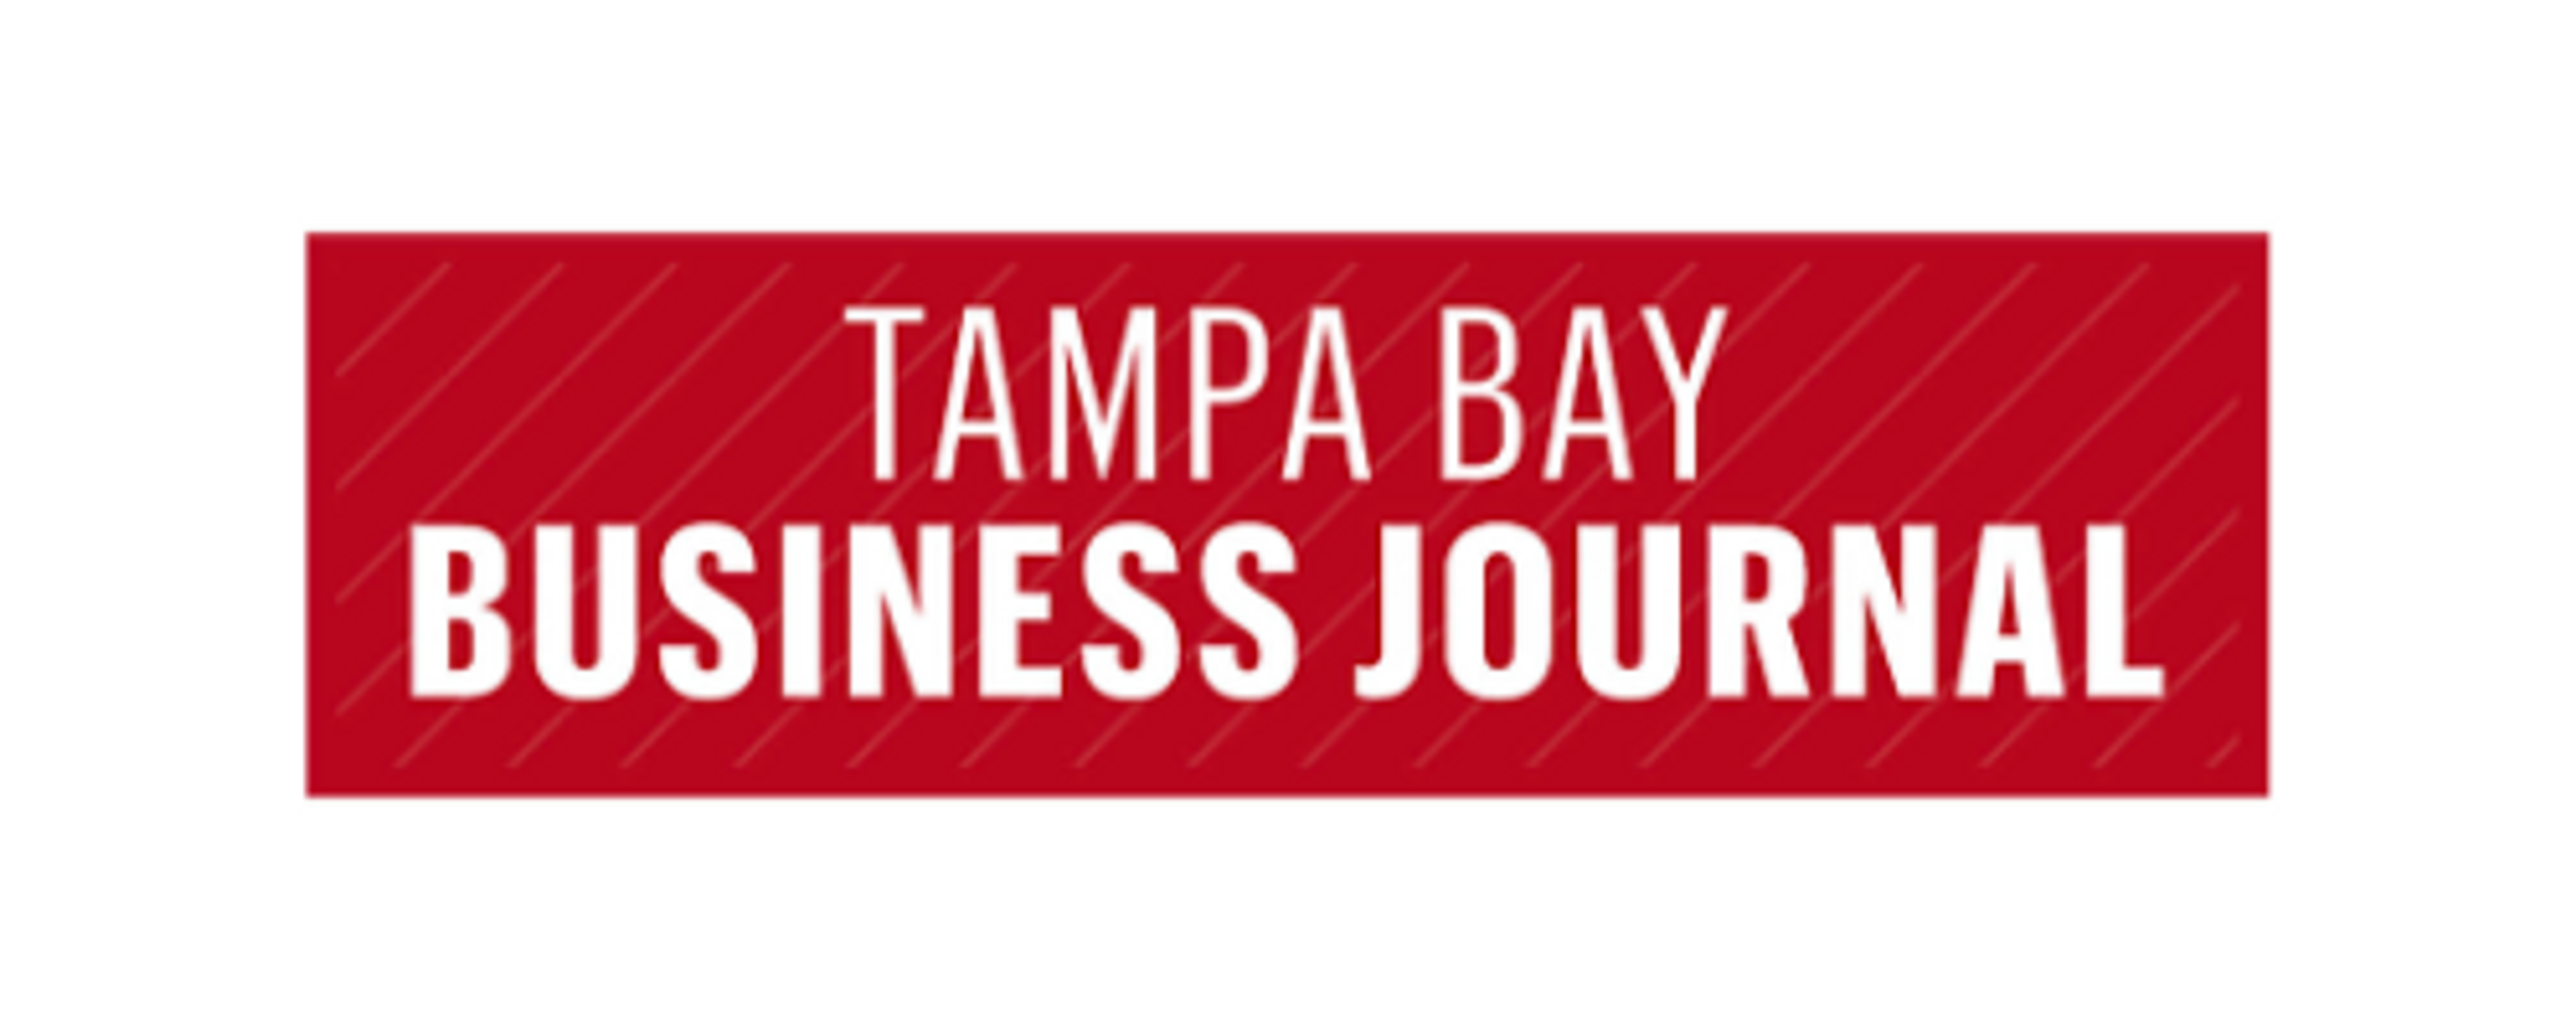 tampa bay business journal